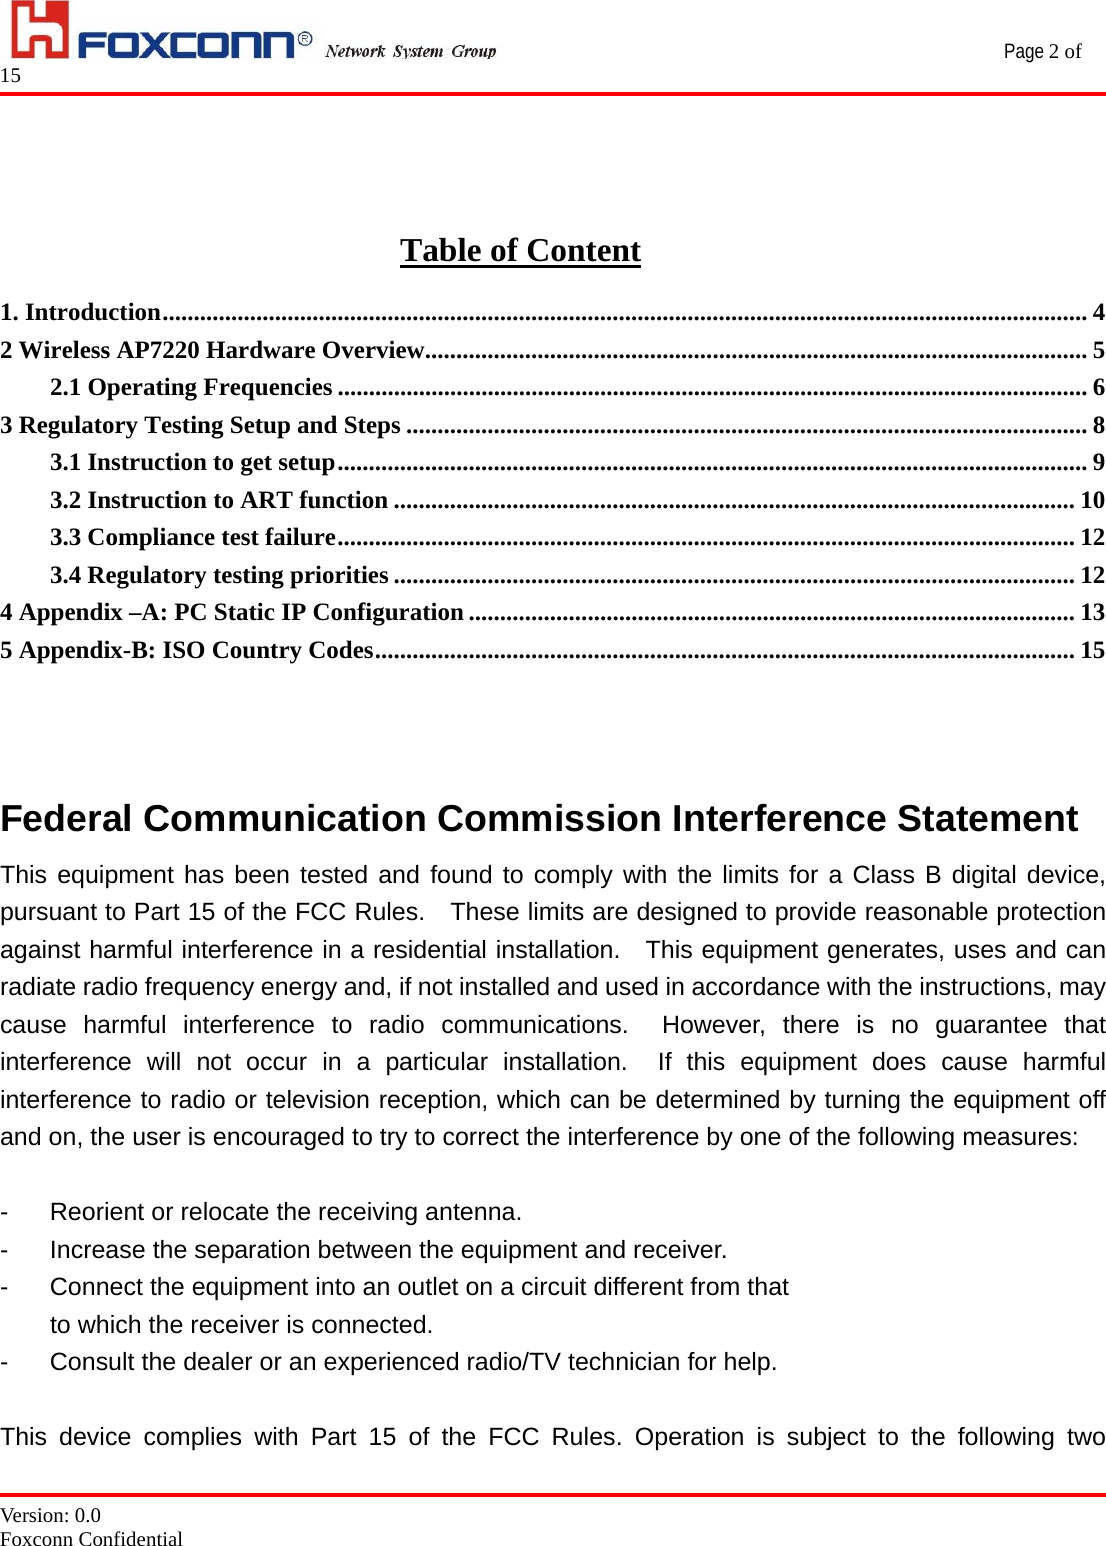                                                 Page 2 of 15   Version: 0.0 Foxconn Confidential  Table of Content 1. Introduction.................................................................................................................................................... 4 2 Wireless AP7220 Hardware Overview.......................................................................................................... 5 2.1 Operating Frequencies ........................................................................................................................ 6 3 Regulatory Testing Setup and Steps ............................................................................................................. 8 3.1 Instruction to get setup........................................................................................................................ 9 3.2 Instruction to ART function ............................................................................................................. 10 3.3 Compliance test failure...................................................................................................................... 12 3.4 Regulatory testing priorities ............................................................................................................. 12 4 Appendix –A: PC Static IP Configuration ................................................................................................. 13 5 Appendix-B: ISO Country Codes................................................................................................................ 15   Federal Communication Commission Interference Statement This equipment has been tested and found to comply with the limits for a Class B digital device, pursuant to Part 15 of the FCC Rules.    These limits are designed to provide reasonable protection against harmful interference in a residential installation.  This equipment generates, uses and can radiate radio frequency energy and, if not installed and used in accordance with the instructions, may cause harmful interference to radio communications.  However, there is no guarantee that interference will not occur in a particular installation.  If this equipment does cause harmful interference to radio or television reception, which can be determined by turning the equipment off and on, the user is encouraged to try to correct the interference by one of the following measures:  -  Reorient or relocate the receiving antenna. -  Increase the separation between the equipment and receiver. -  Connect the equipment into an outlet on a circuit different from that to which the receiver is connected. -  Consult the dealer or an experienced radio/TV technician for help.  This device complies with Part 15 of the FCC Rules. Operation is subject to the following two 